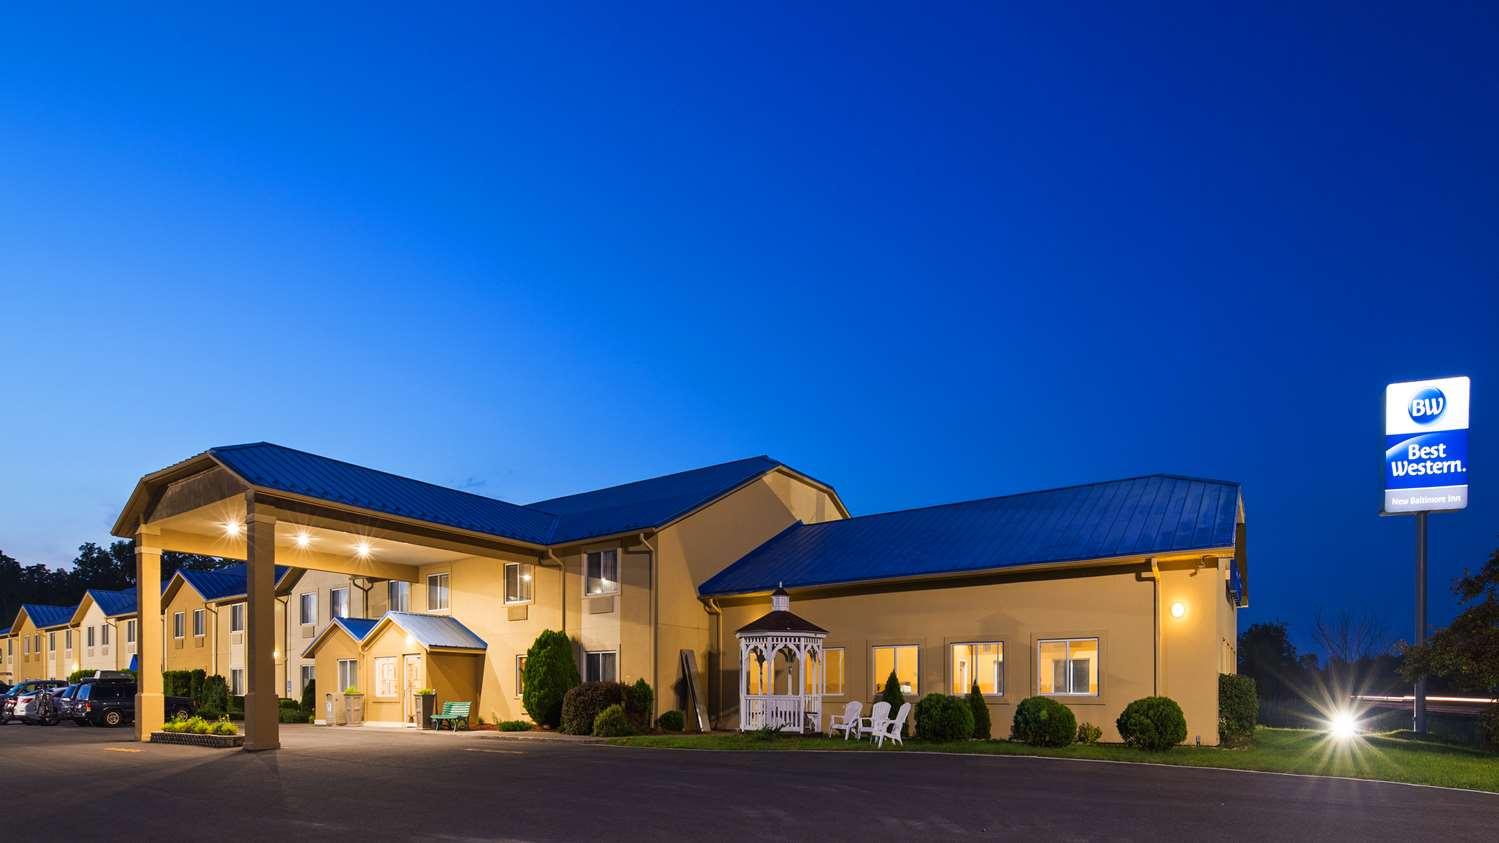 Best Western New Baltimore Inn in West Coxsackie, NY